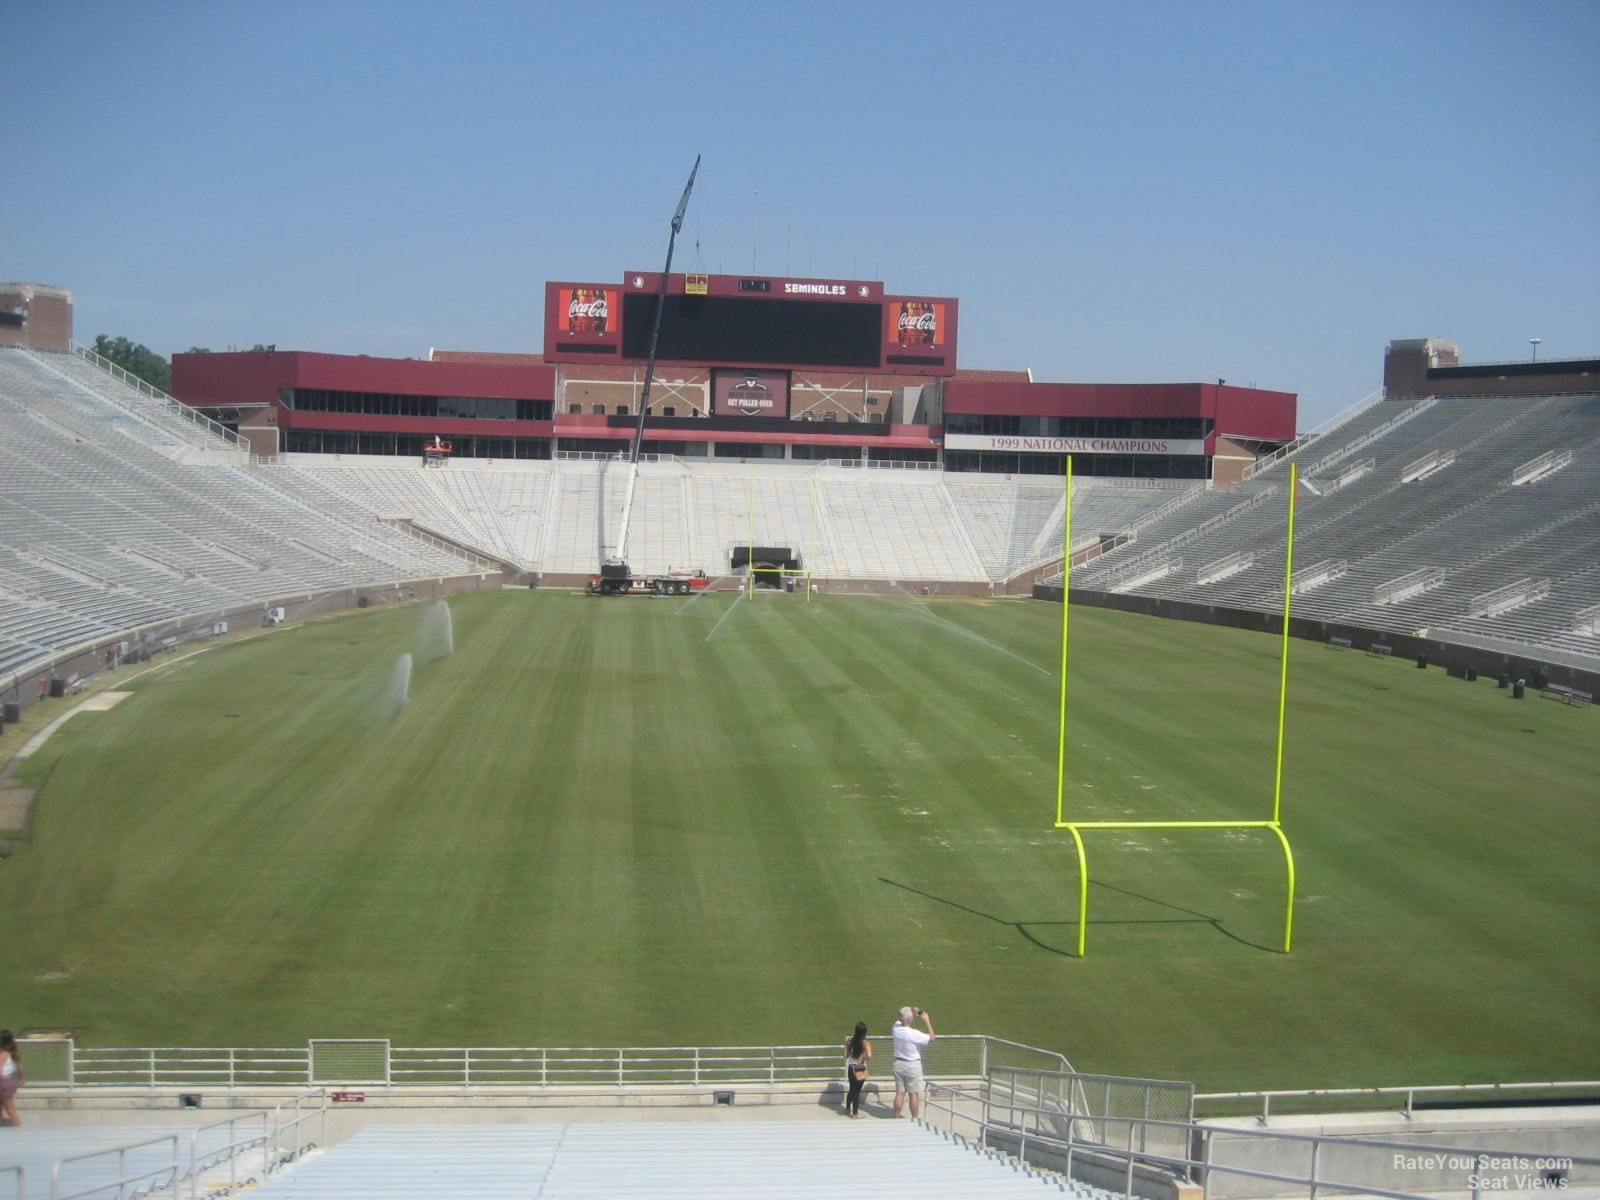 section 121, row 40 seat view  - doak campbell stadium